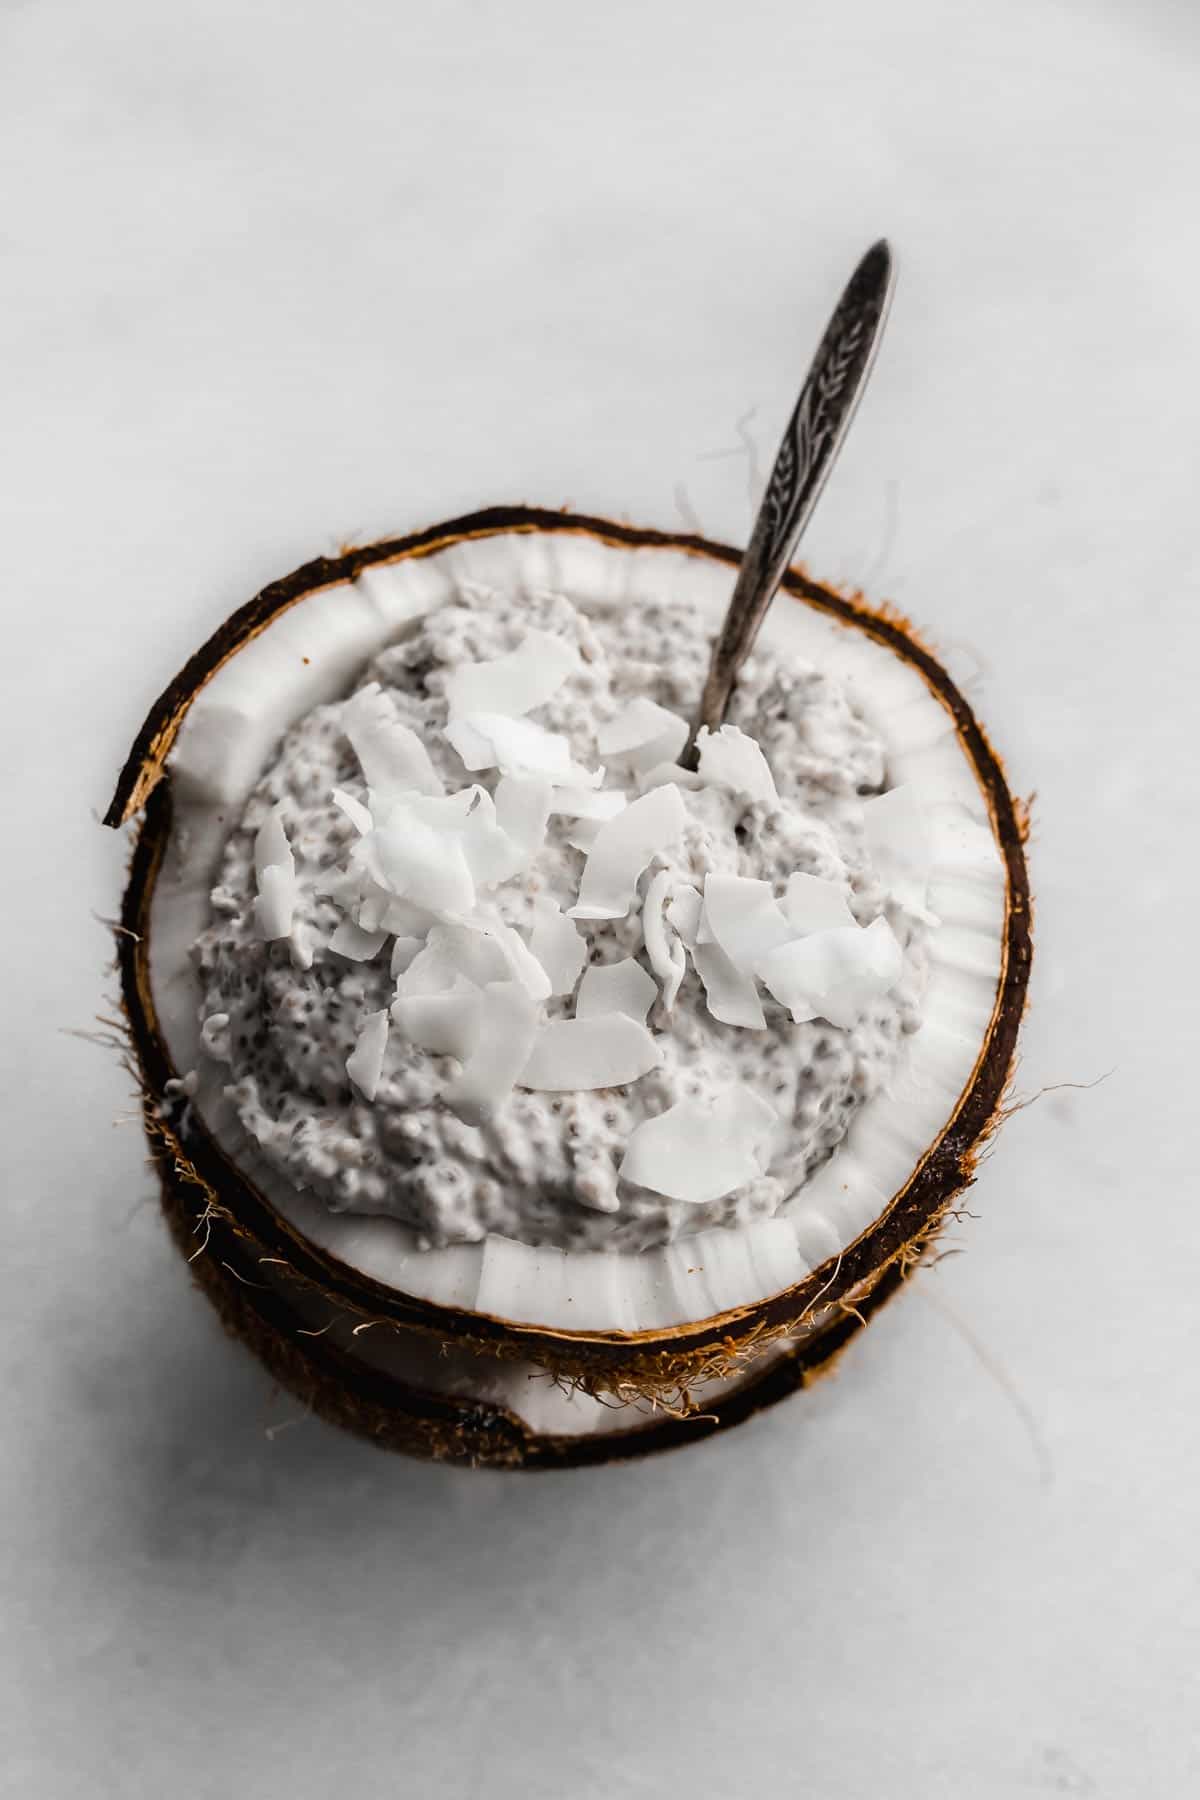 Overnight Coconut Chia Pudding topped with flaky coconut on a white background.